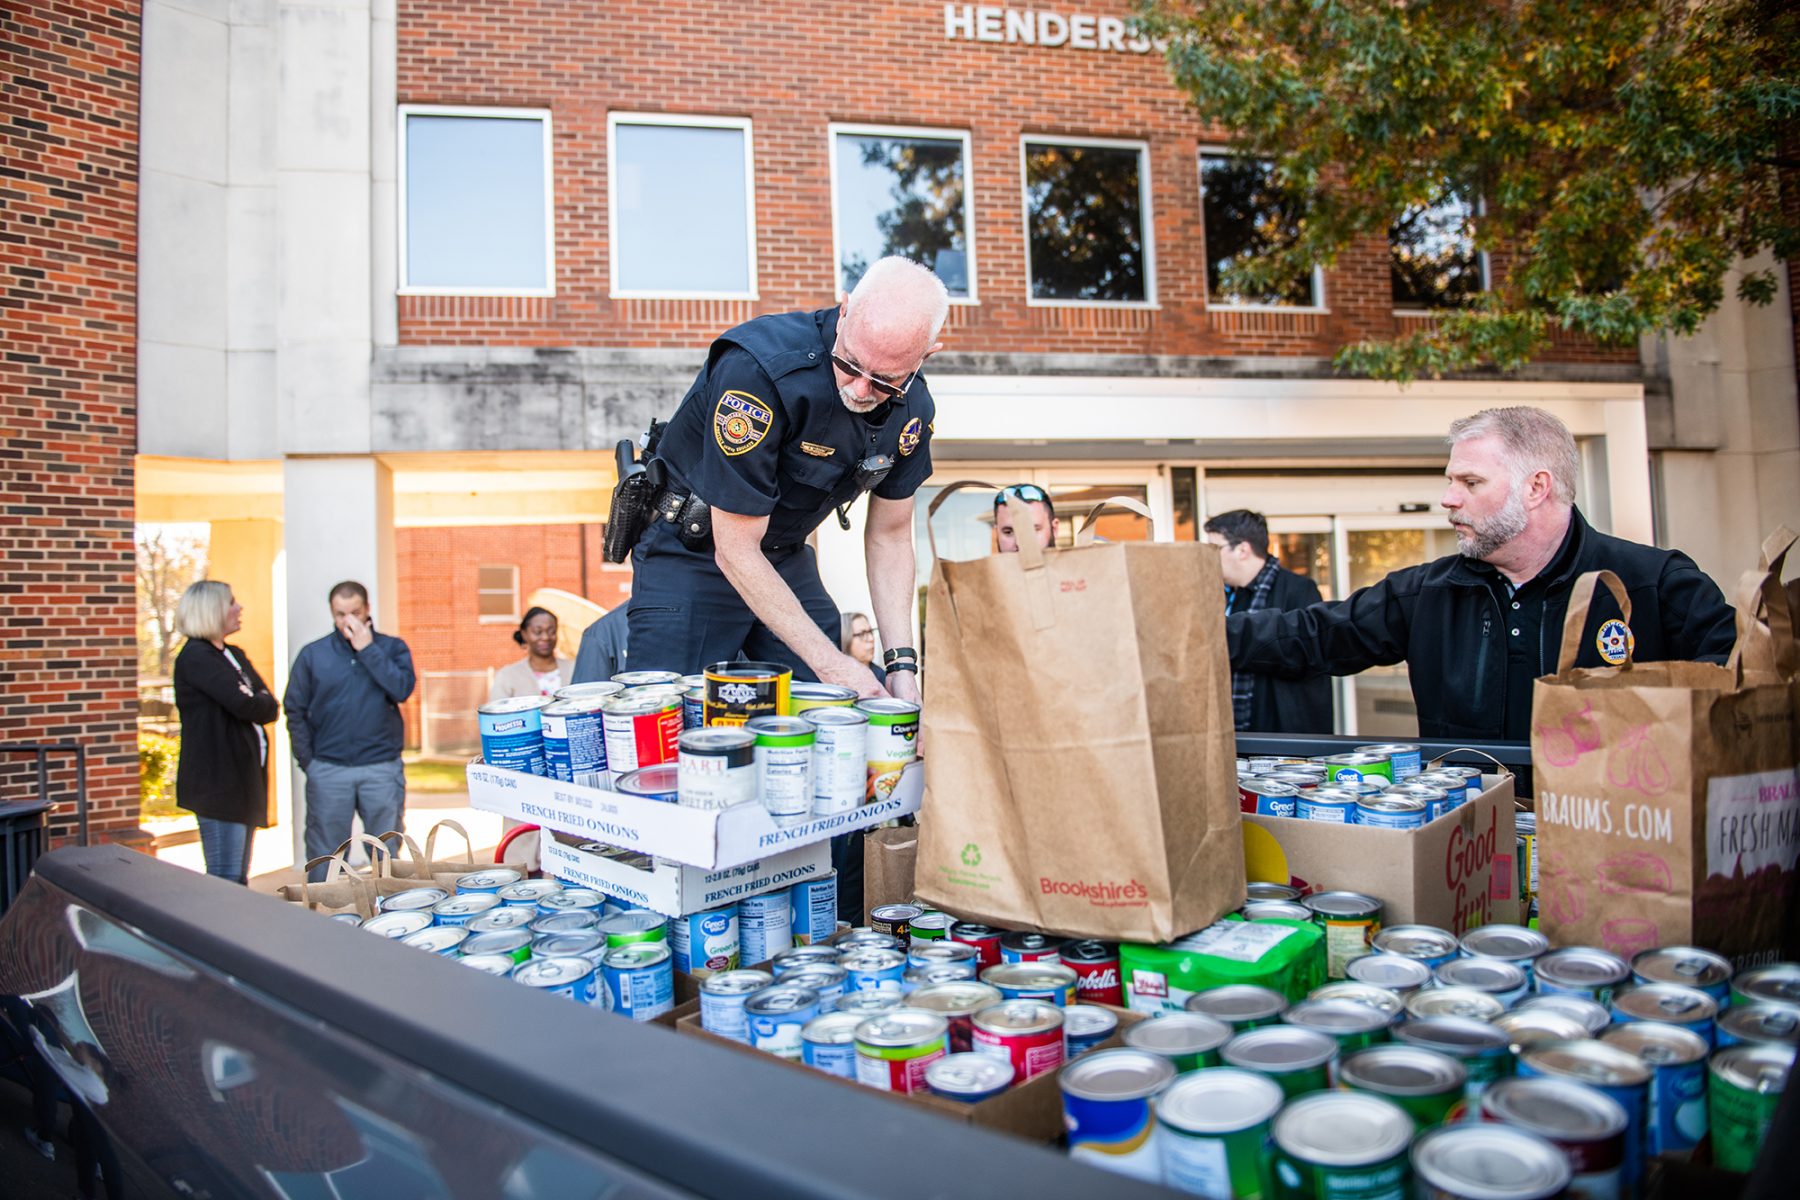 Officers helping load truck with food cans for donations.